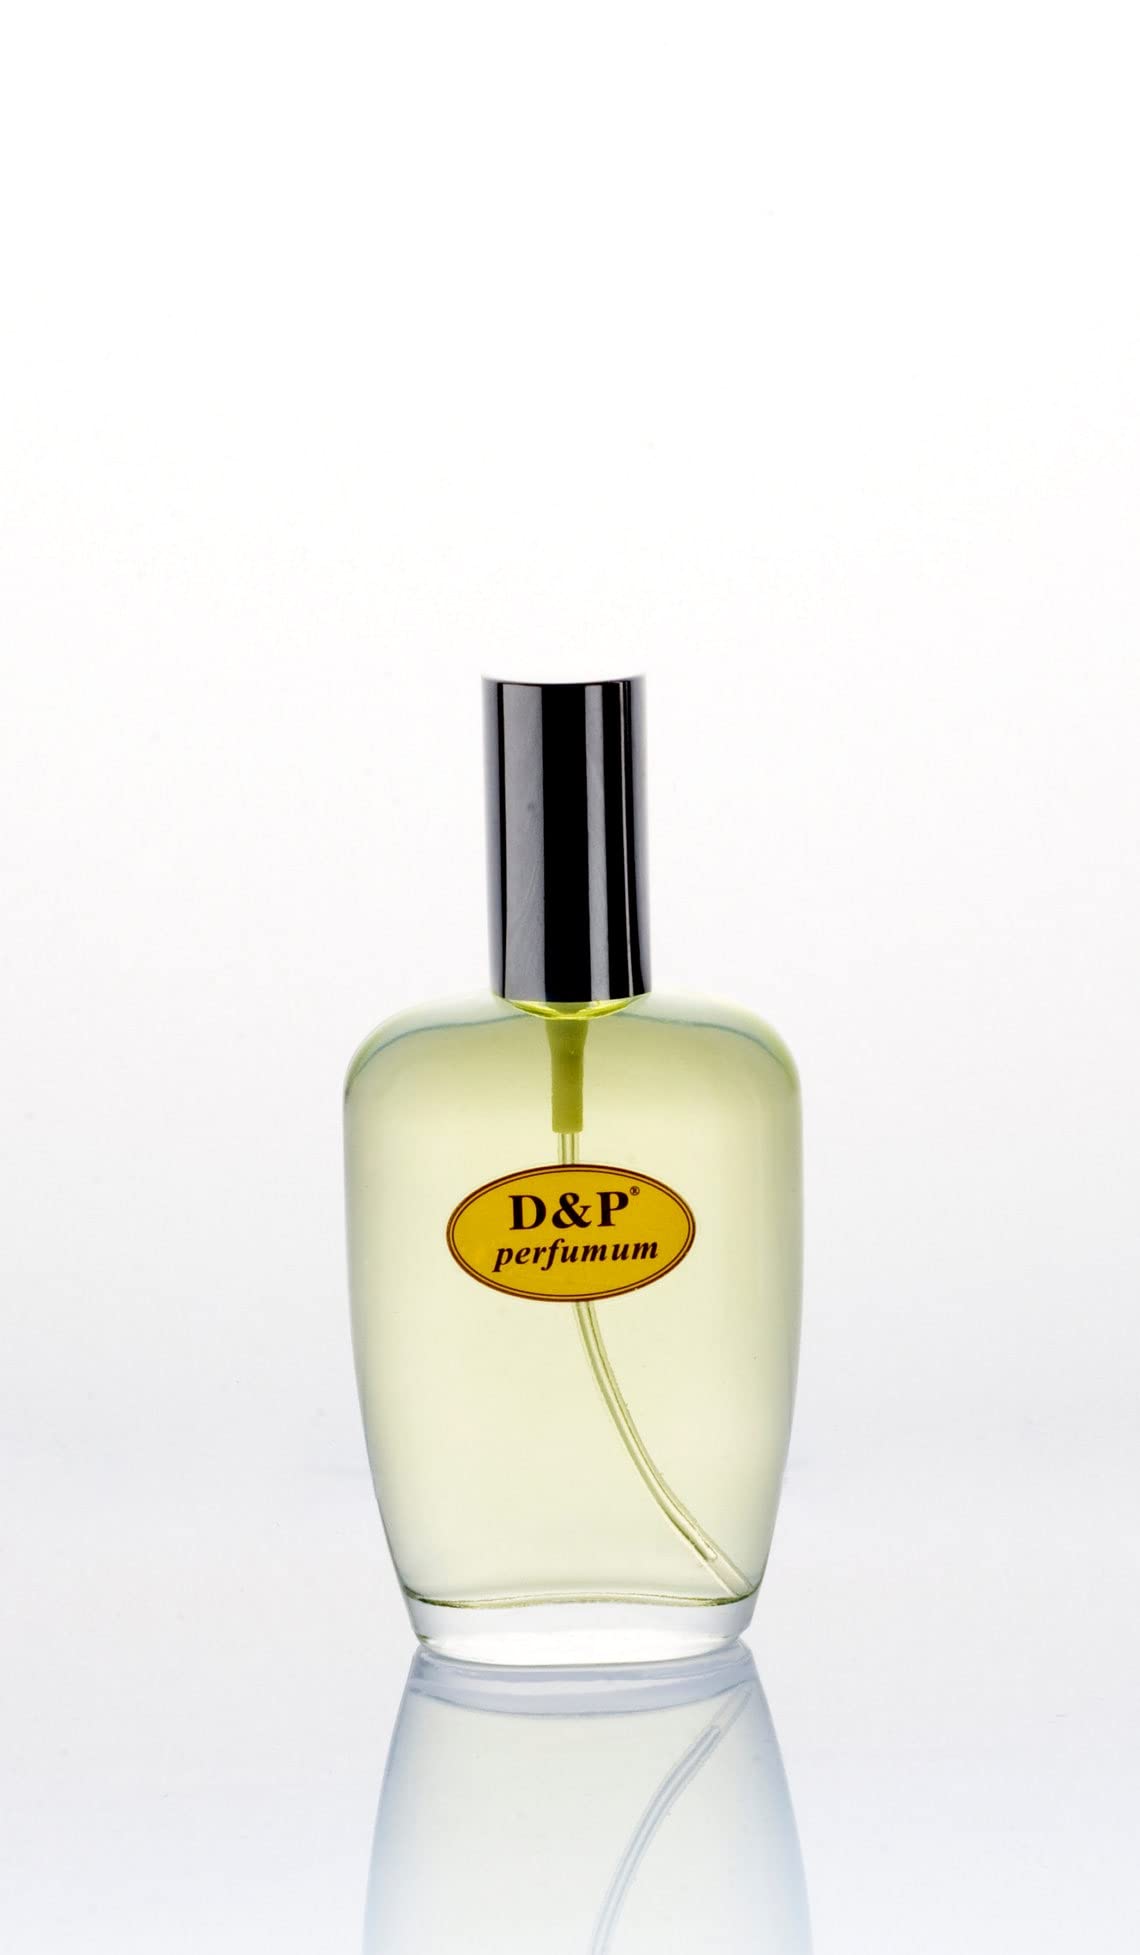 D&P Perfumum Inpired by Aventus for Men, 1.69Fl oz. EDP Mens fragrance with Jasmine, Velvety Woods and Musk. It is a sensual fragrance that makes a great gift.